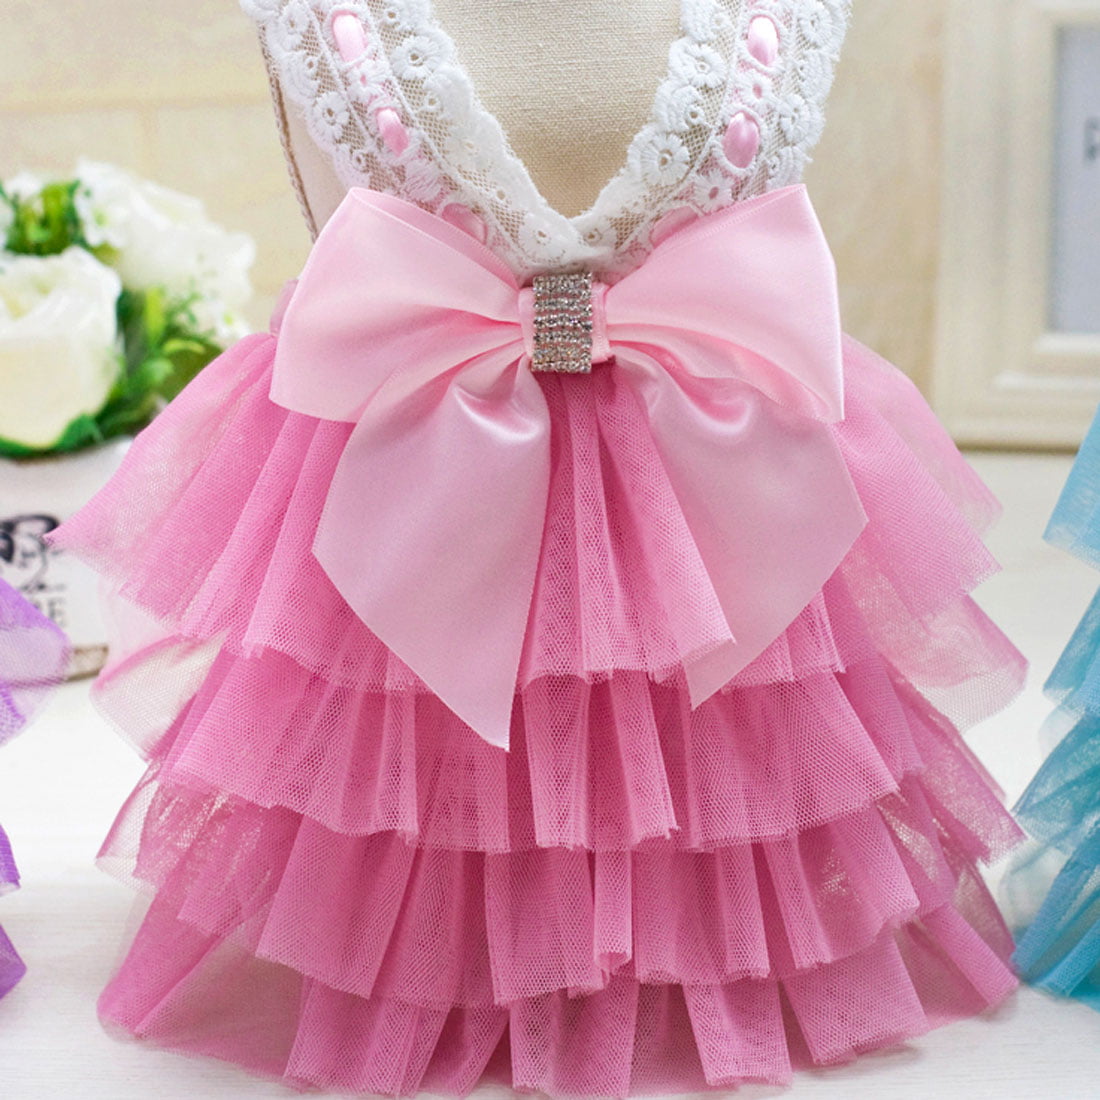 MaruPet Summer Sweet Puppy Doggie Striped Printed Princess Skirt Pet Dog Lace Cake Camisole Tutu Dress with Bowknit 